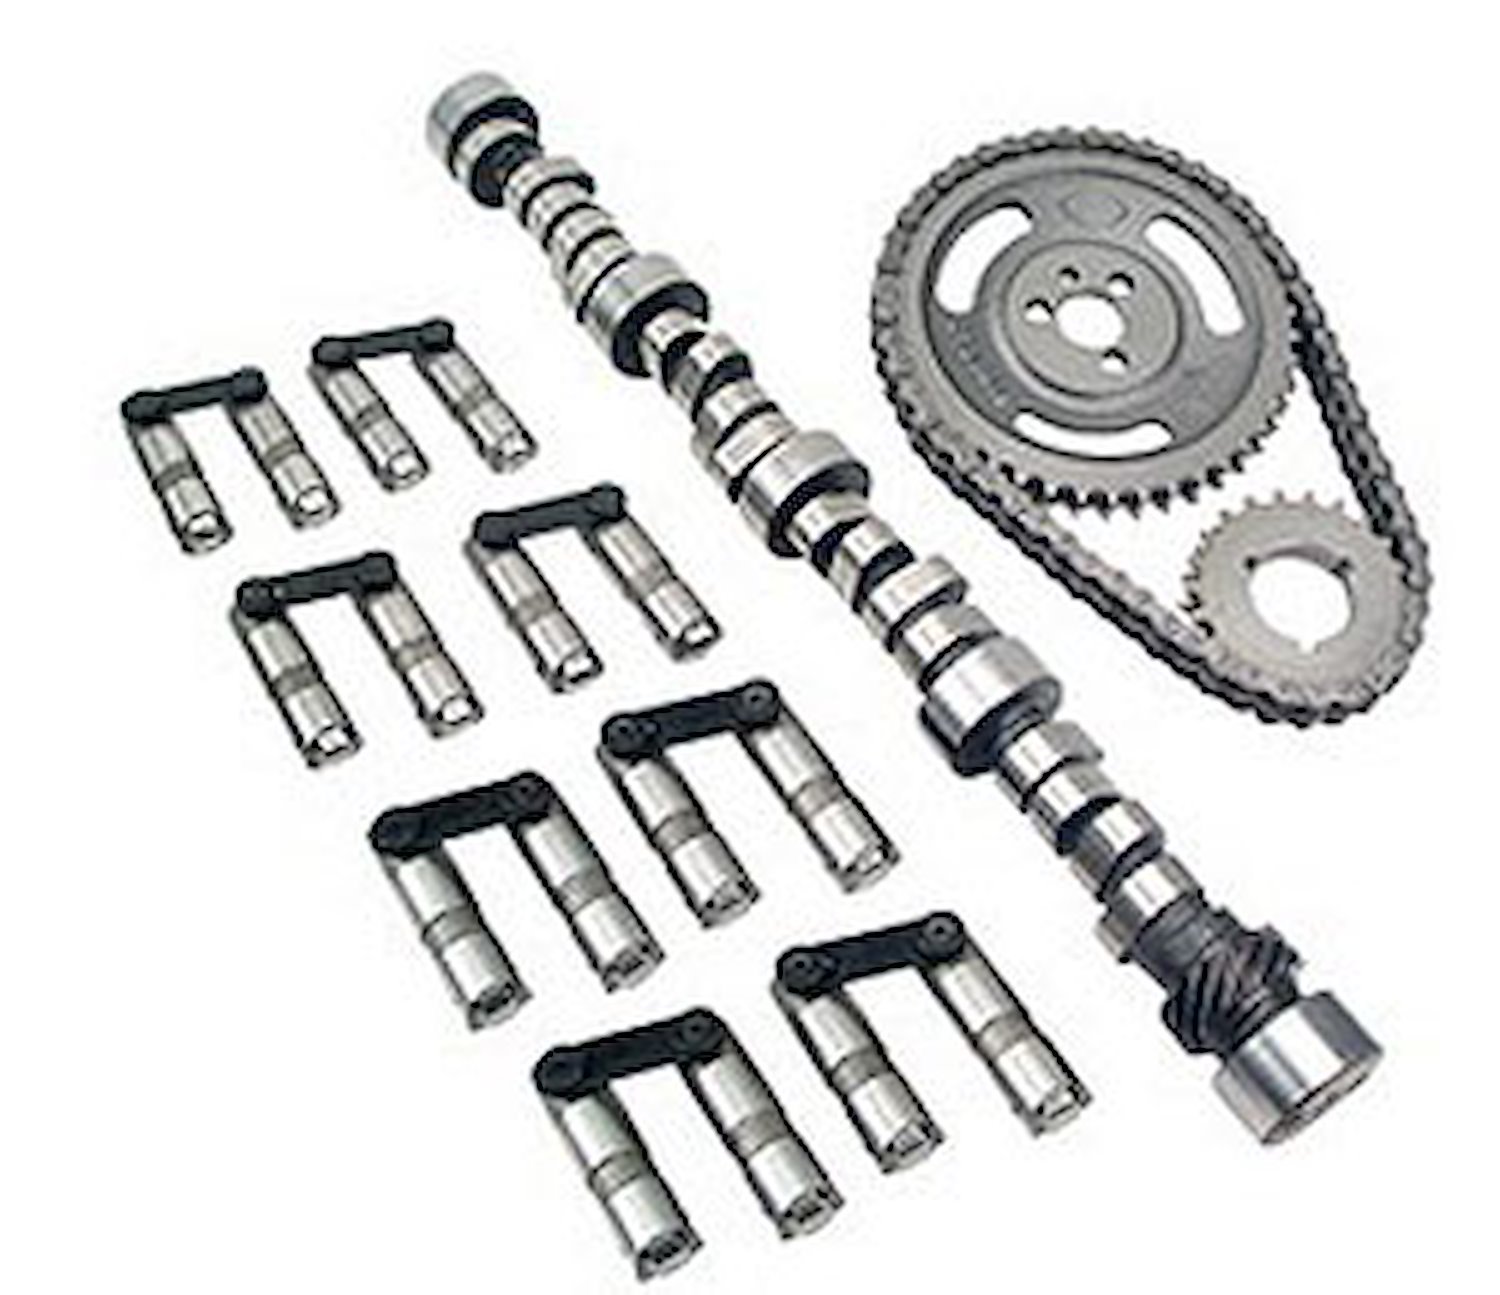 XFI Hydraulic Roller Camshaft Small Kit Small Block Chevy 305/350 1987-95 Lift: .584"/.579" With 1.6 Rockers